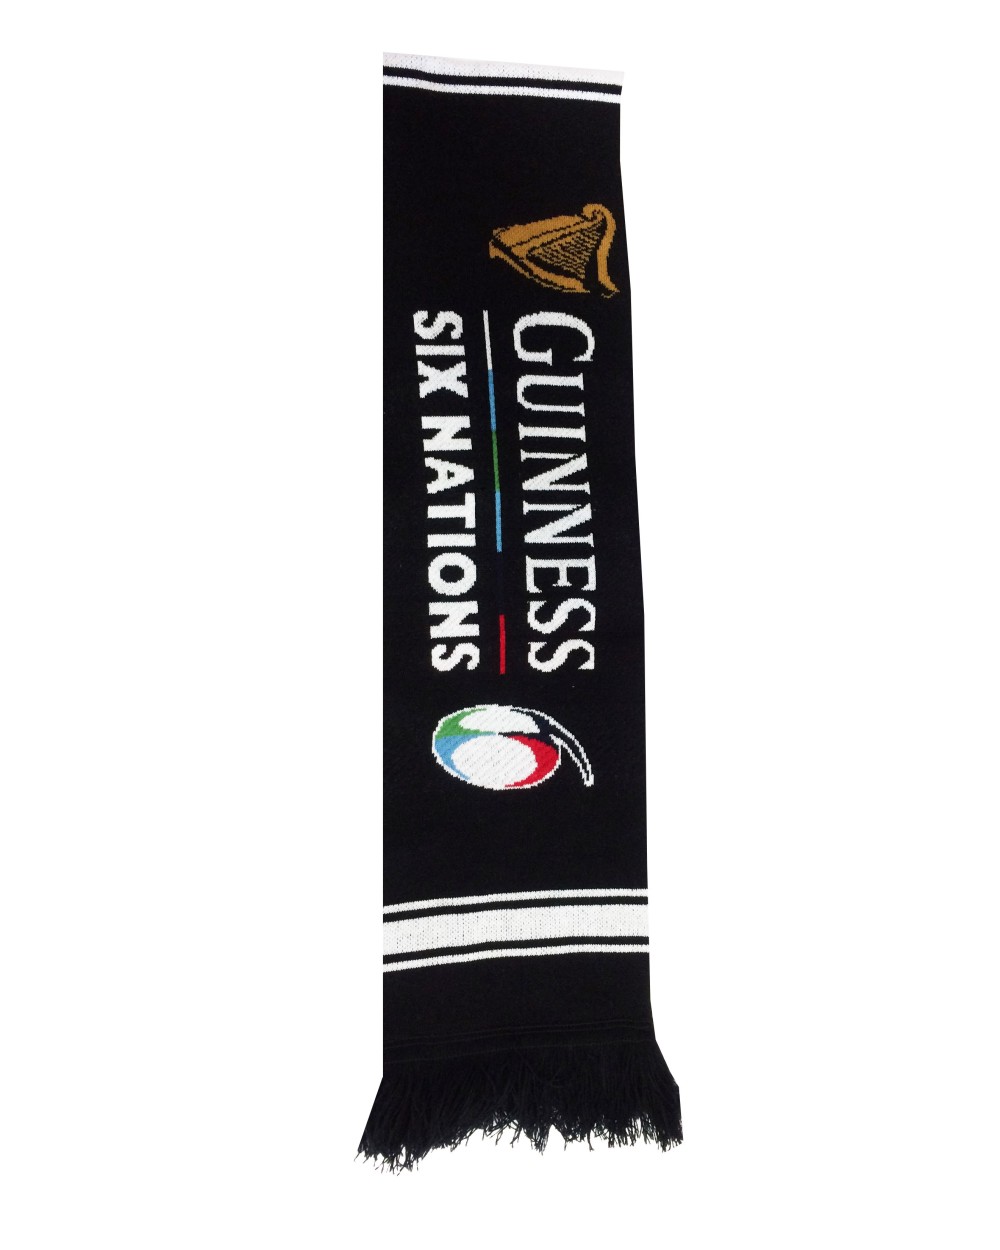 Guinness Black 6 Nations Knitted Scarf